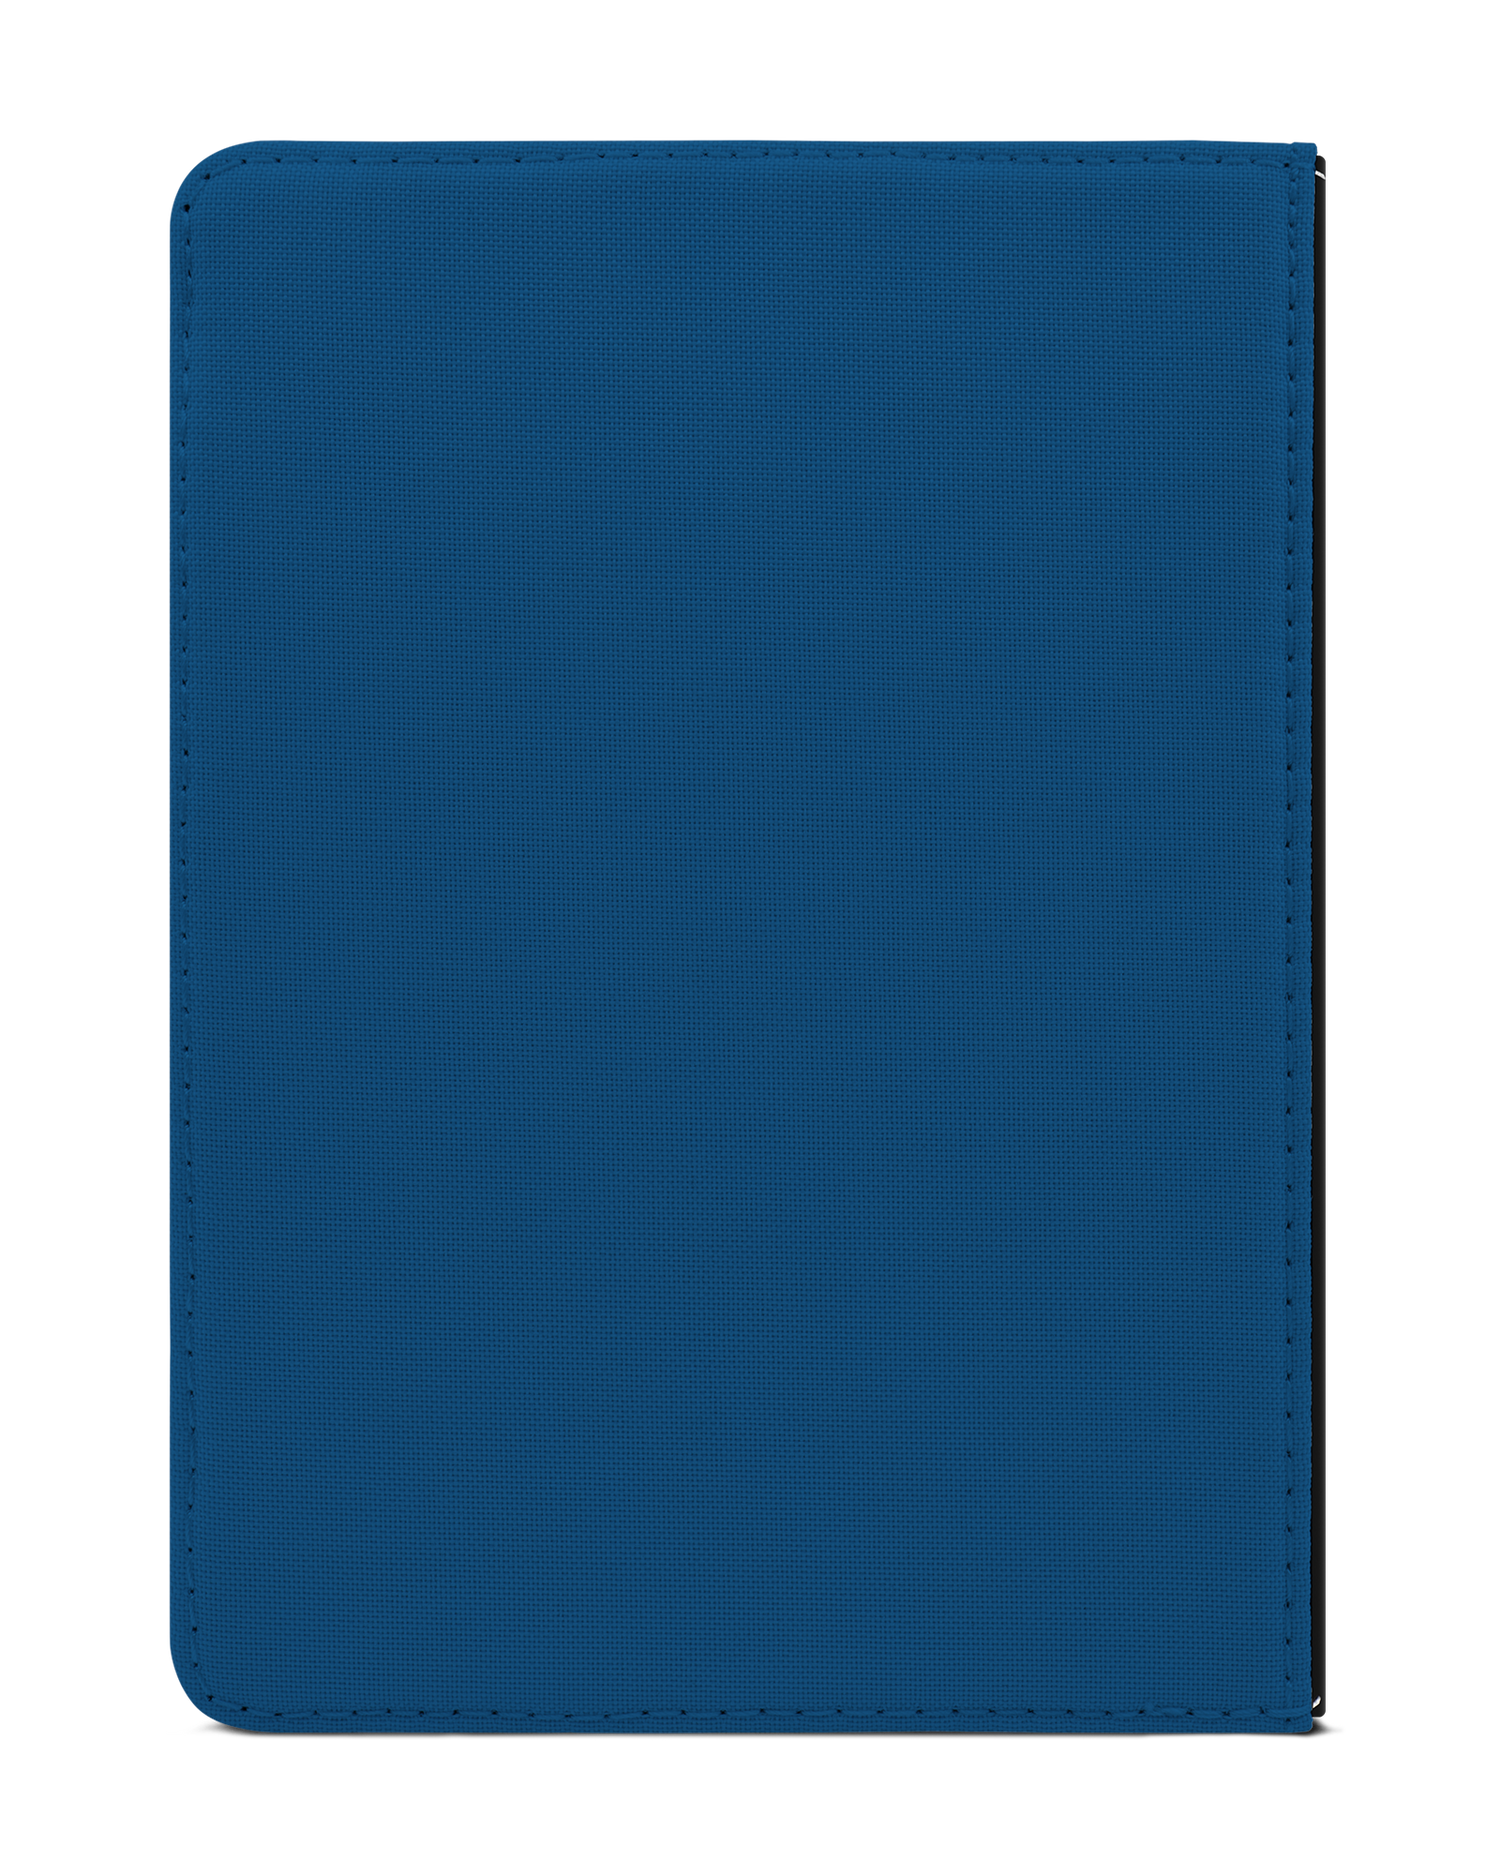 CLASSIC BLUE eReader Case for tolino vision 1 to 4 HD: Back View